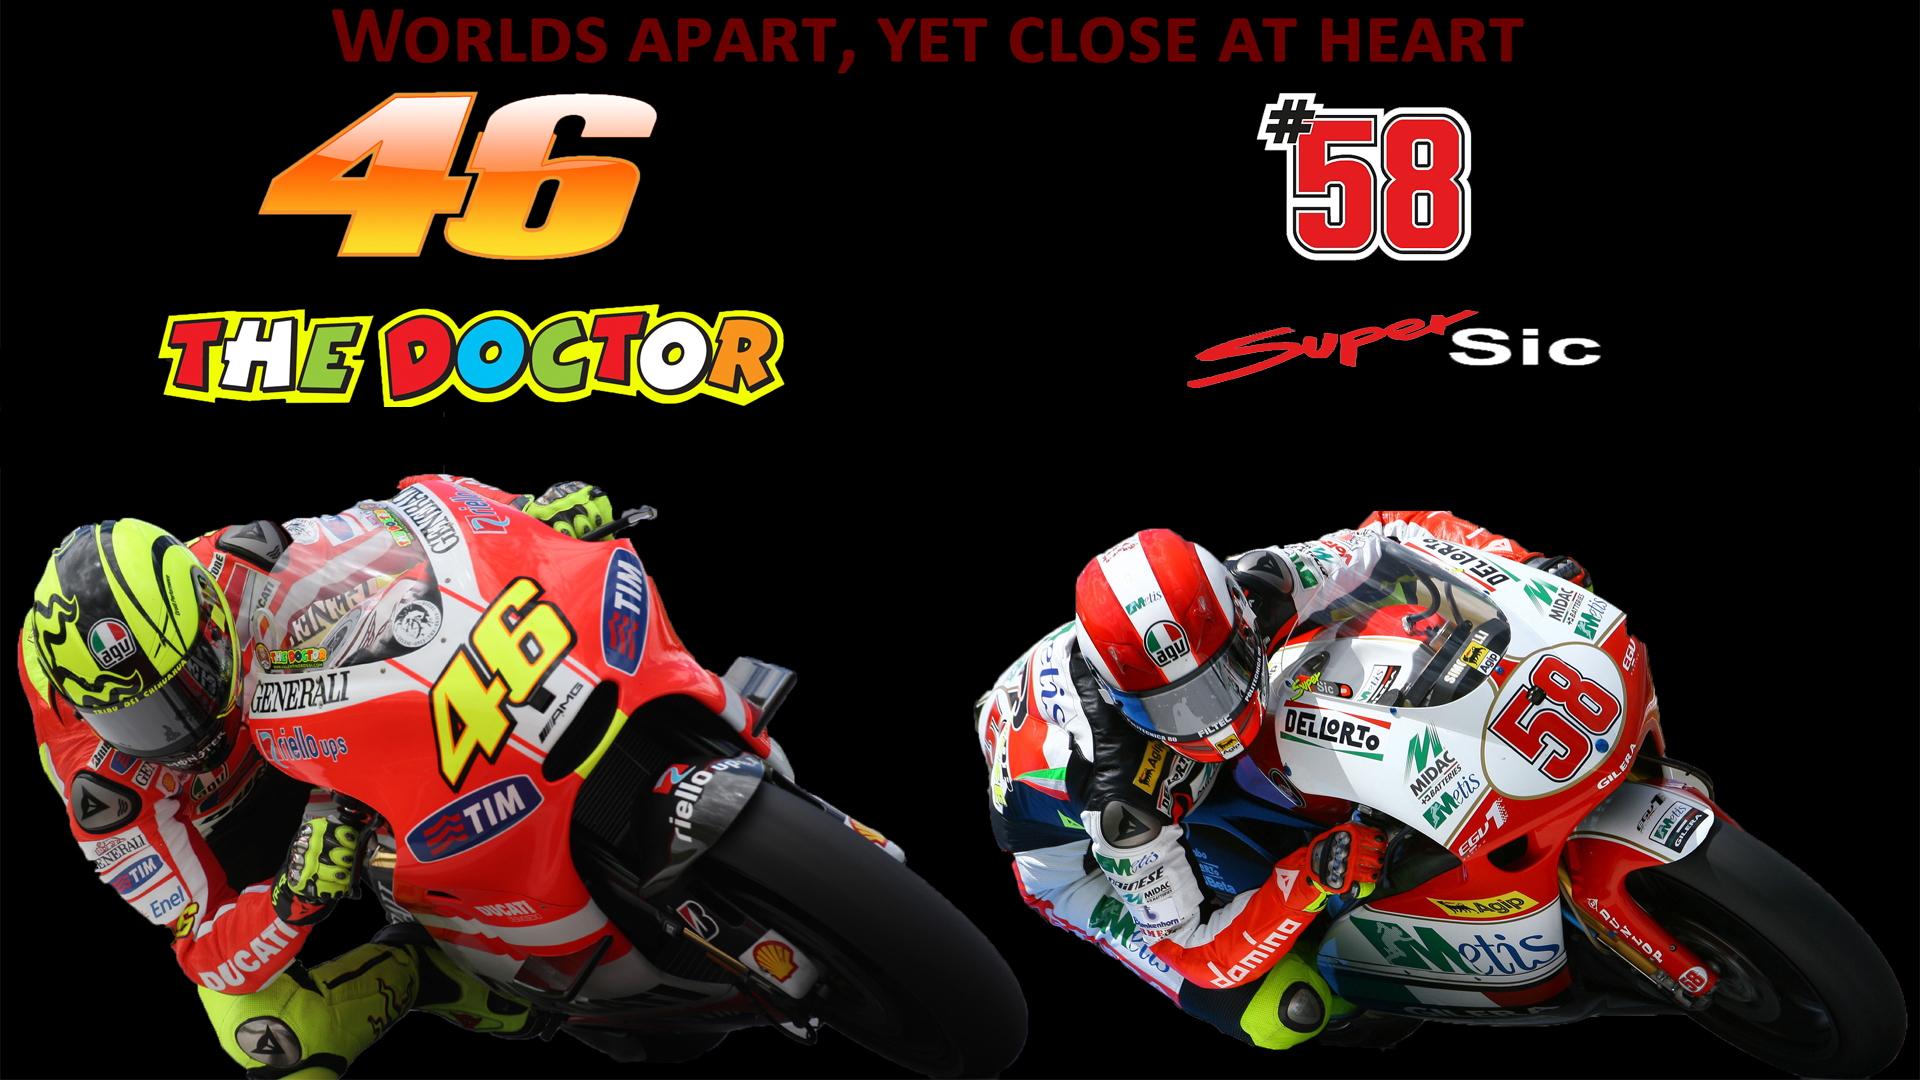 *worlds Apart, Yet Close At Heart* - Valentino Rossi Marco Simoncellu - HD Wallpaper 